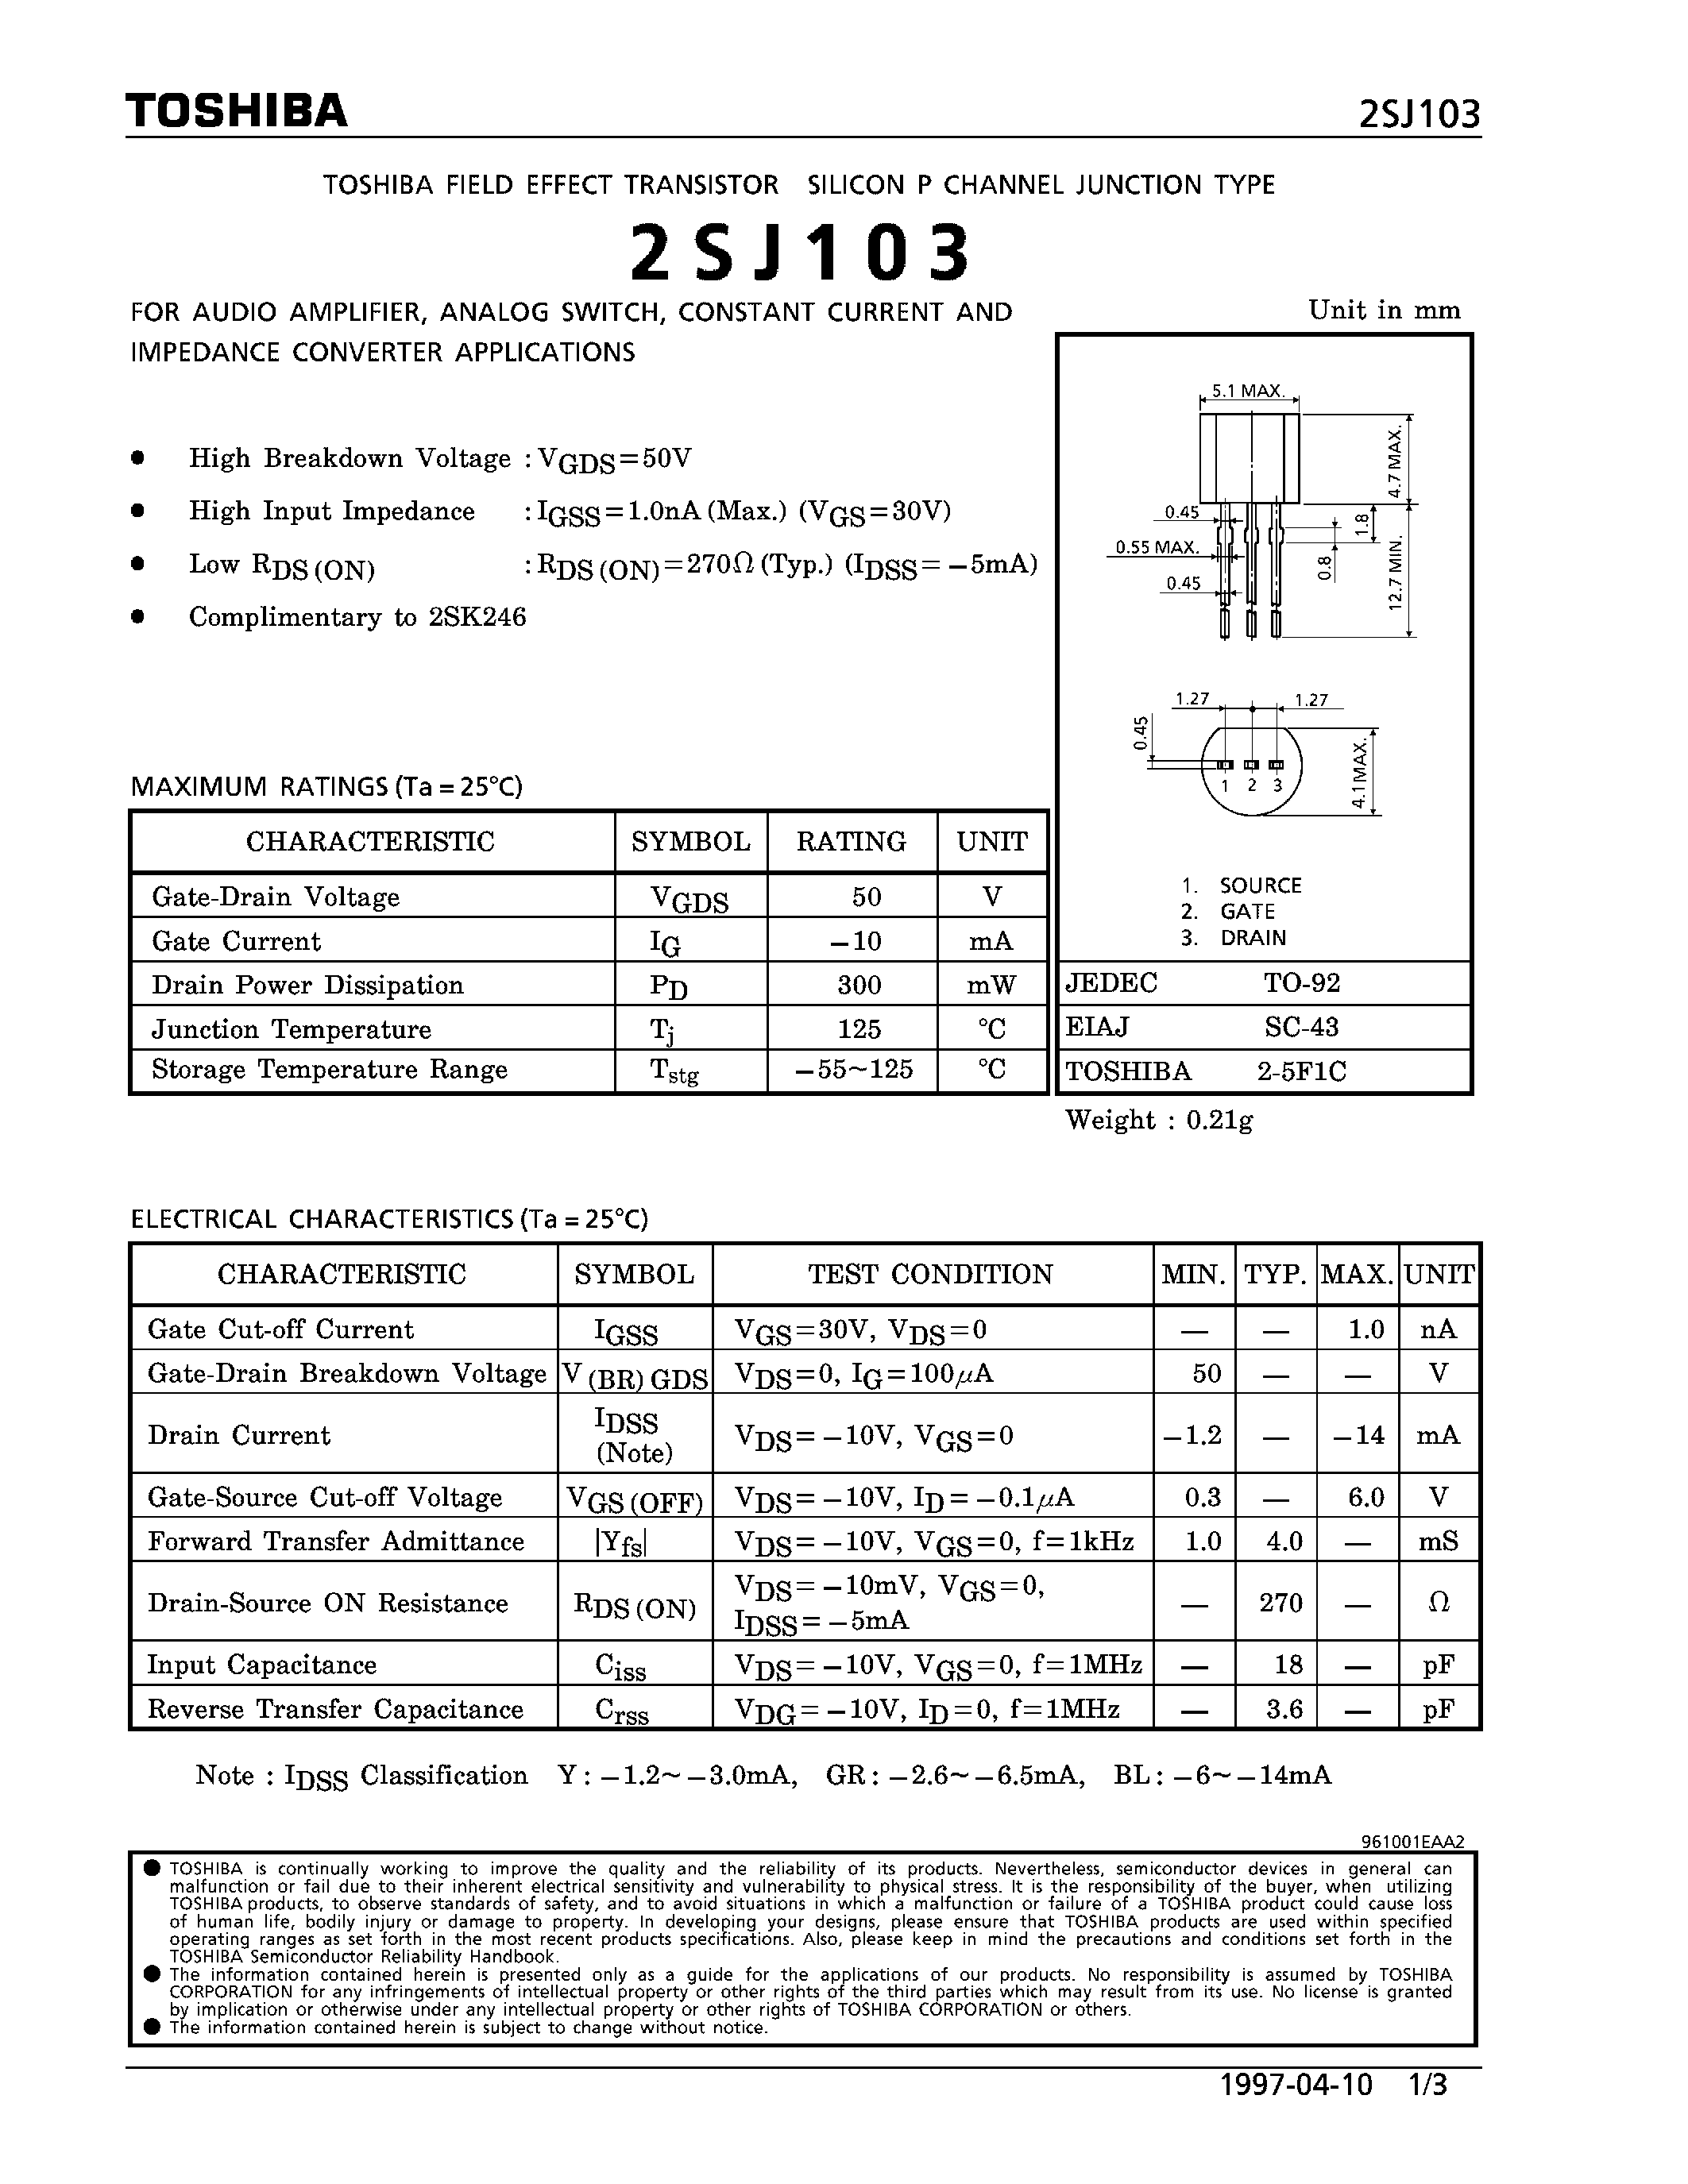 Datasheet 2SJ103 - P CHANNEL JUNCTION TYPE (FOR AUDIO AMPLIFIER / ANALOG SWITCH/ CONSTANT CURRENT AND IMPEDANCE CONVERTER APPLICATIONS) page 1